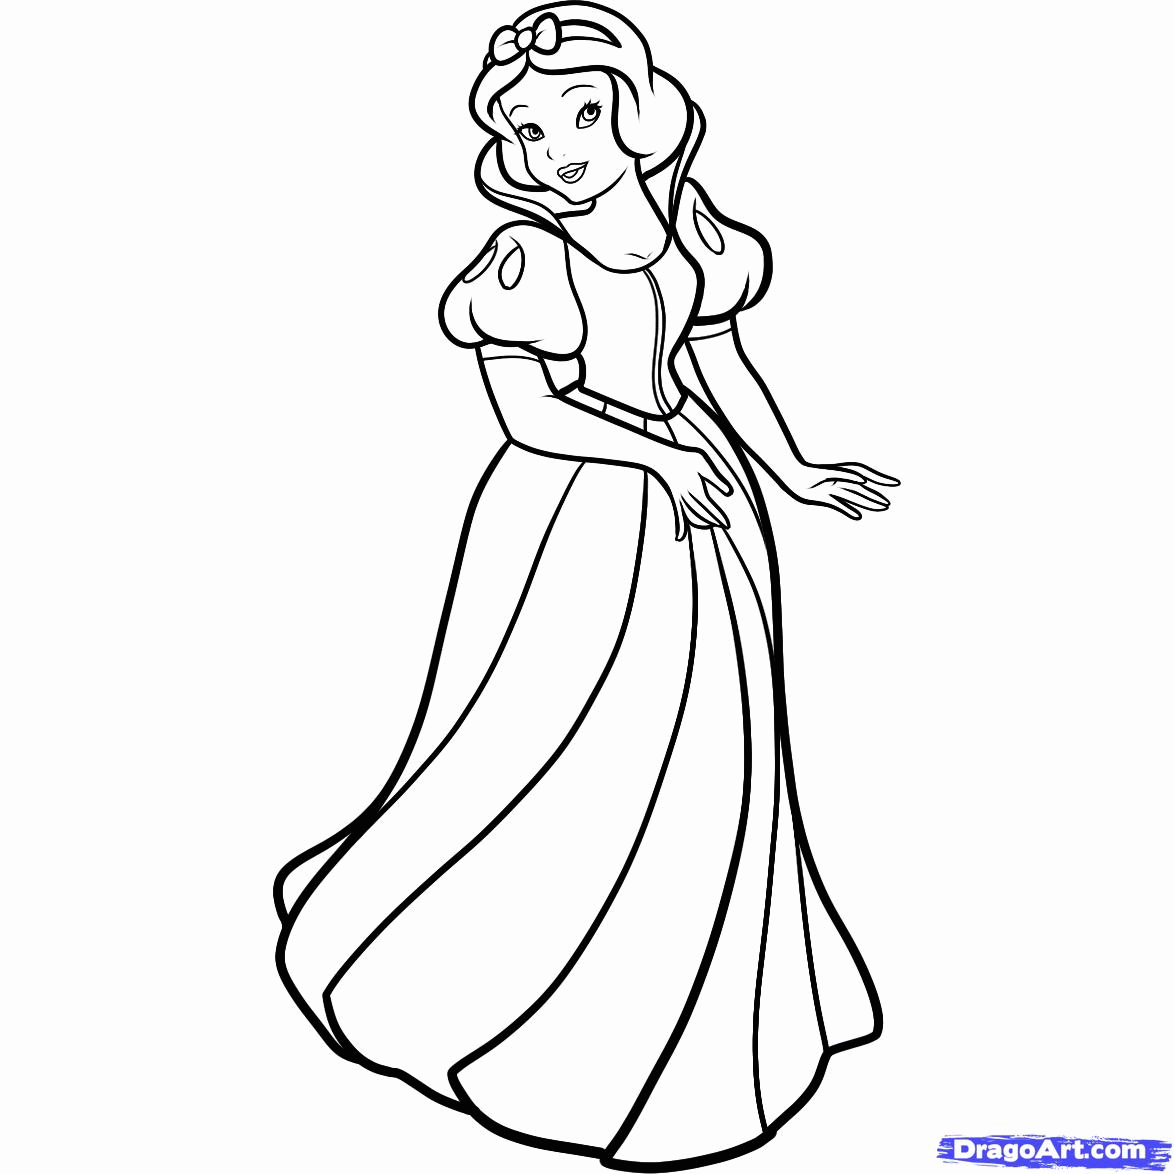 6 Pics Of Snow White And Black Coloring Pages - Disney ...